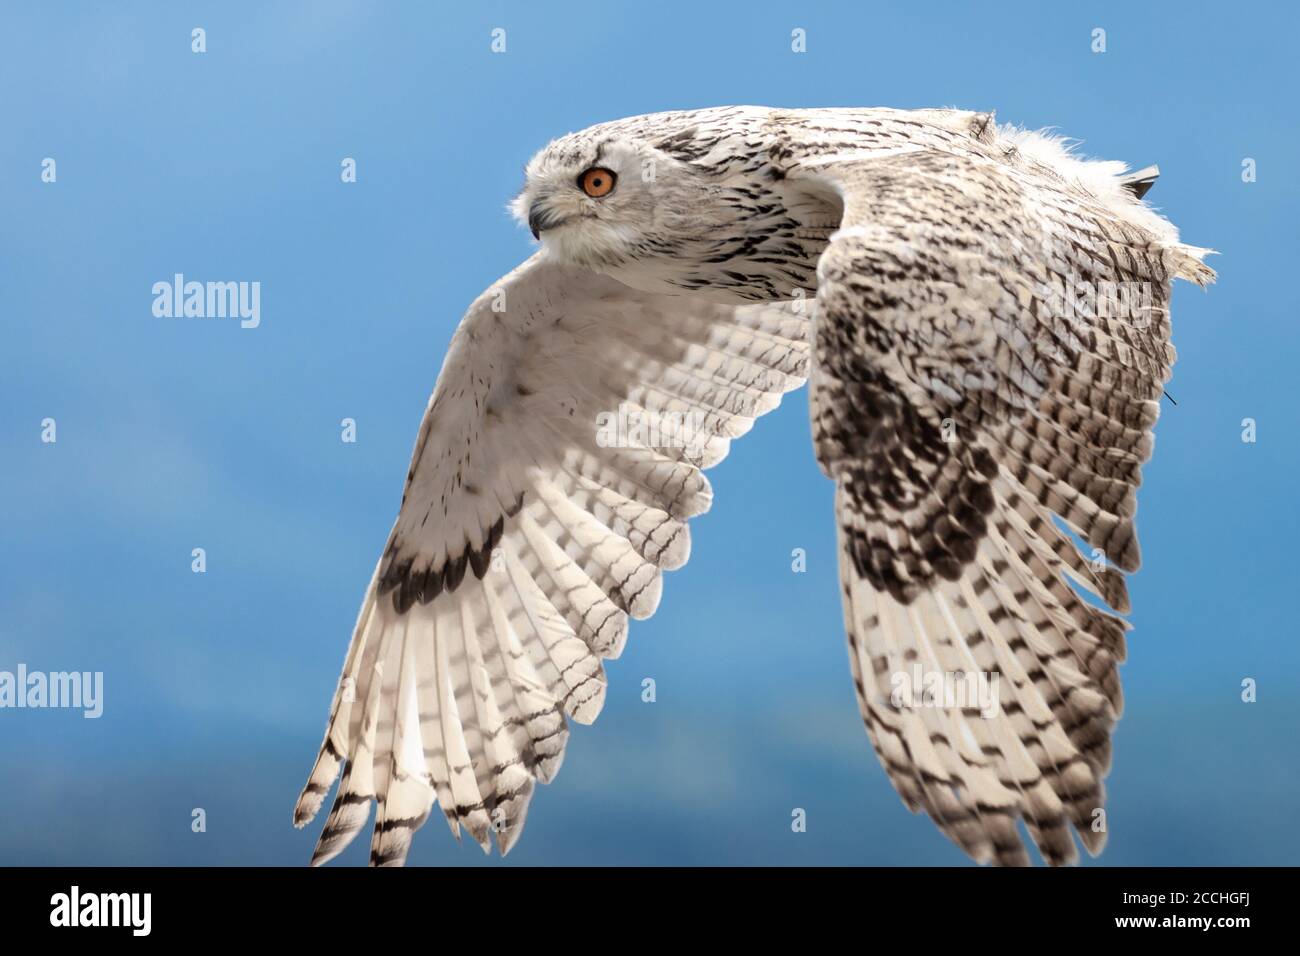 Close up of a white owl flying sideways with its wings spread, againsts a blue sky Stock Photo